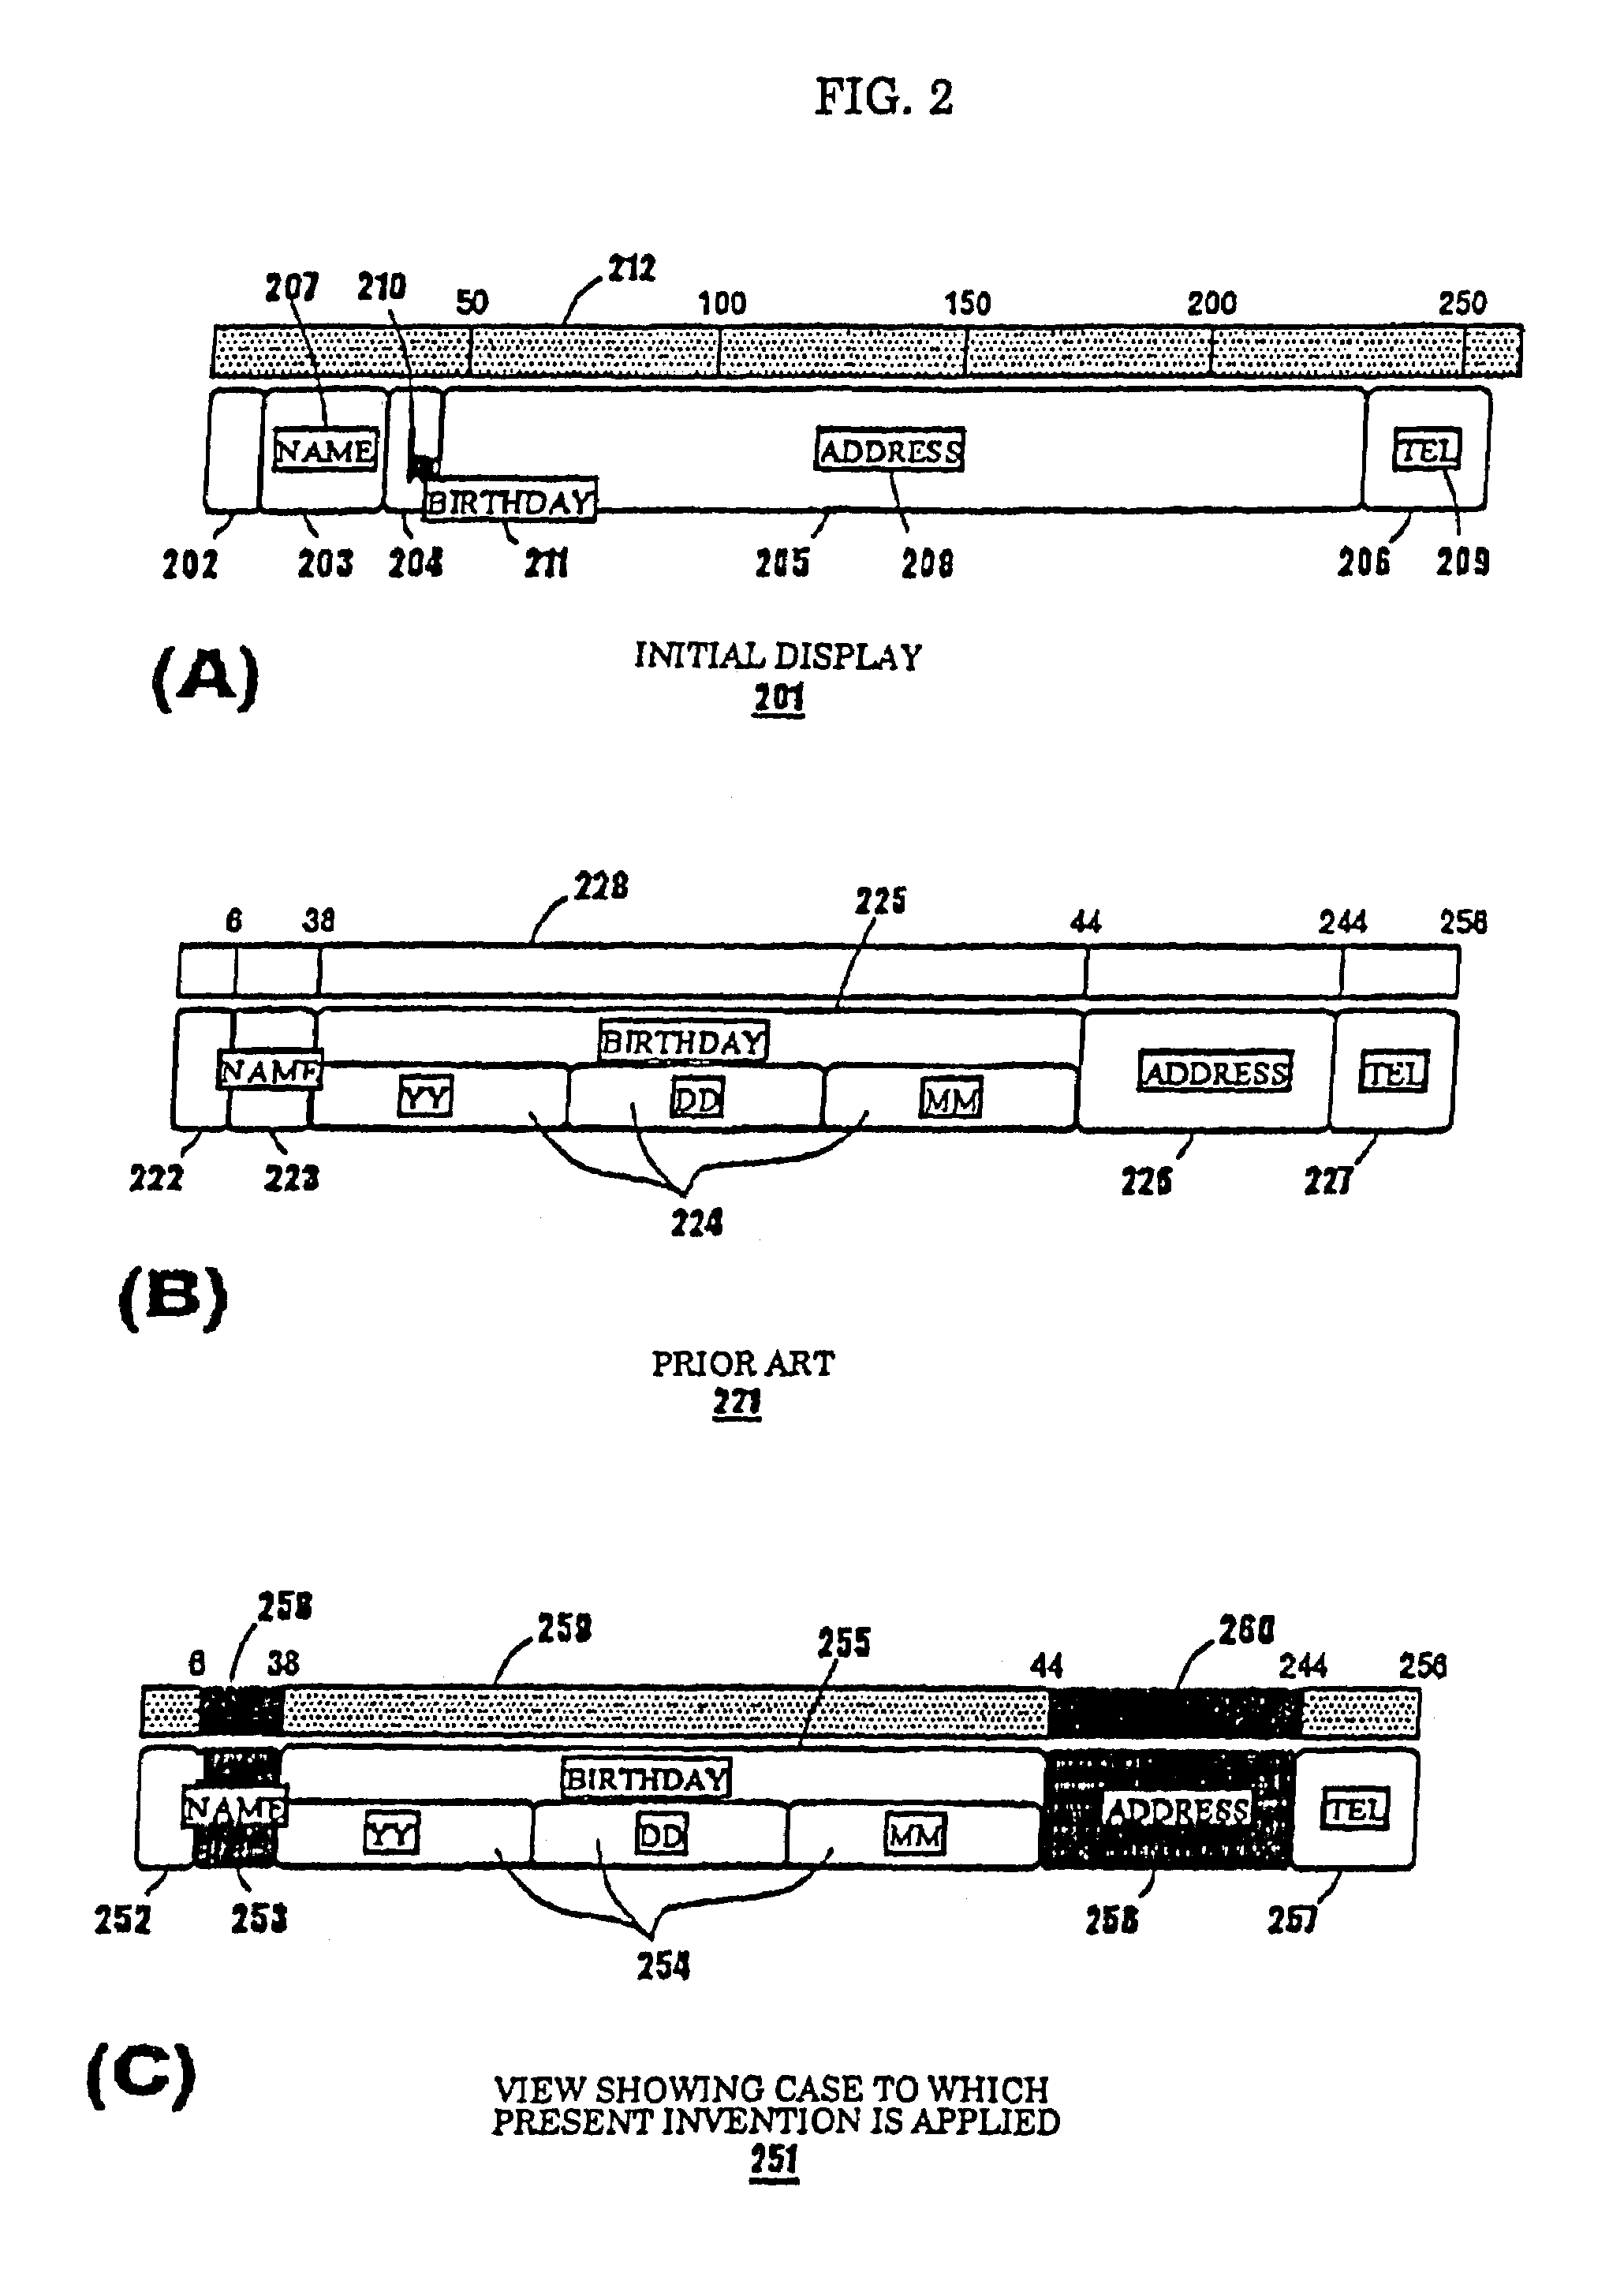 Method of displaying magnified and reduced areas and apparatus thereof